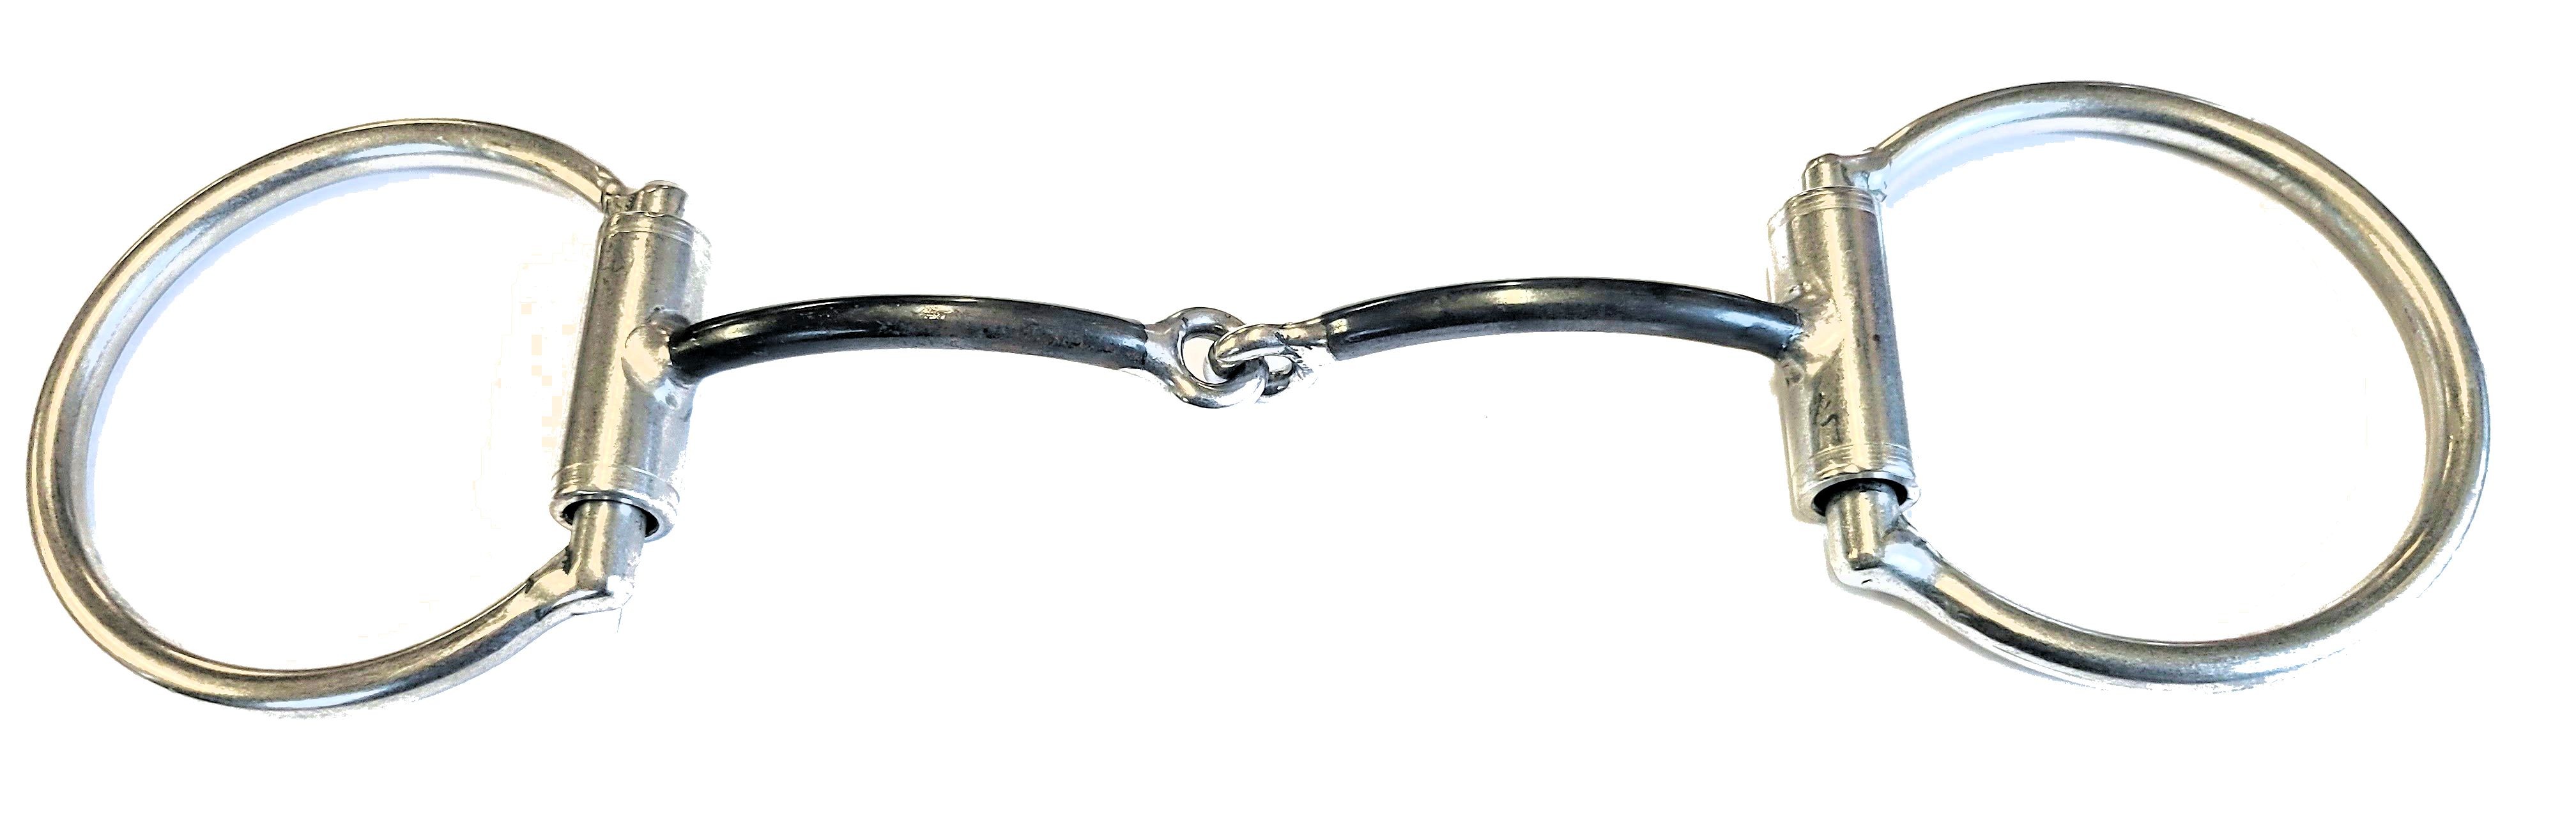 1/4" Smooth Snaffle